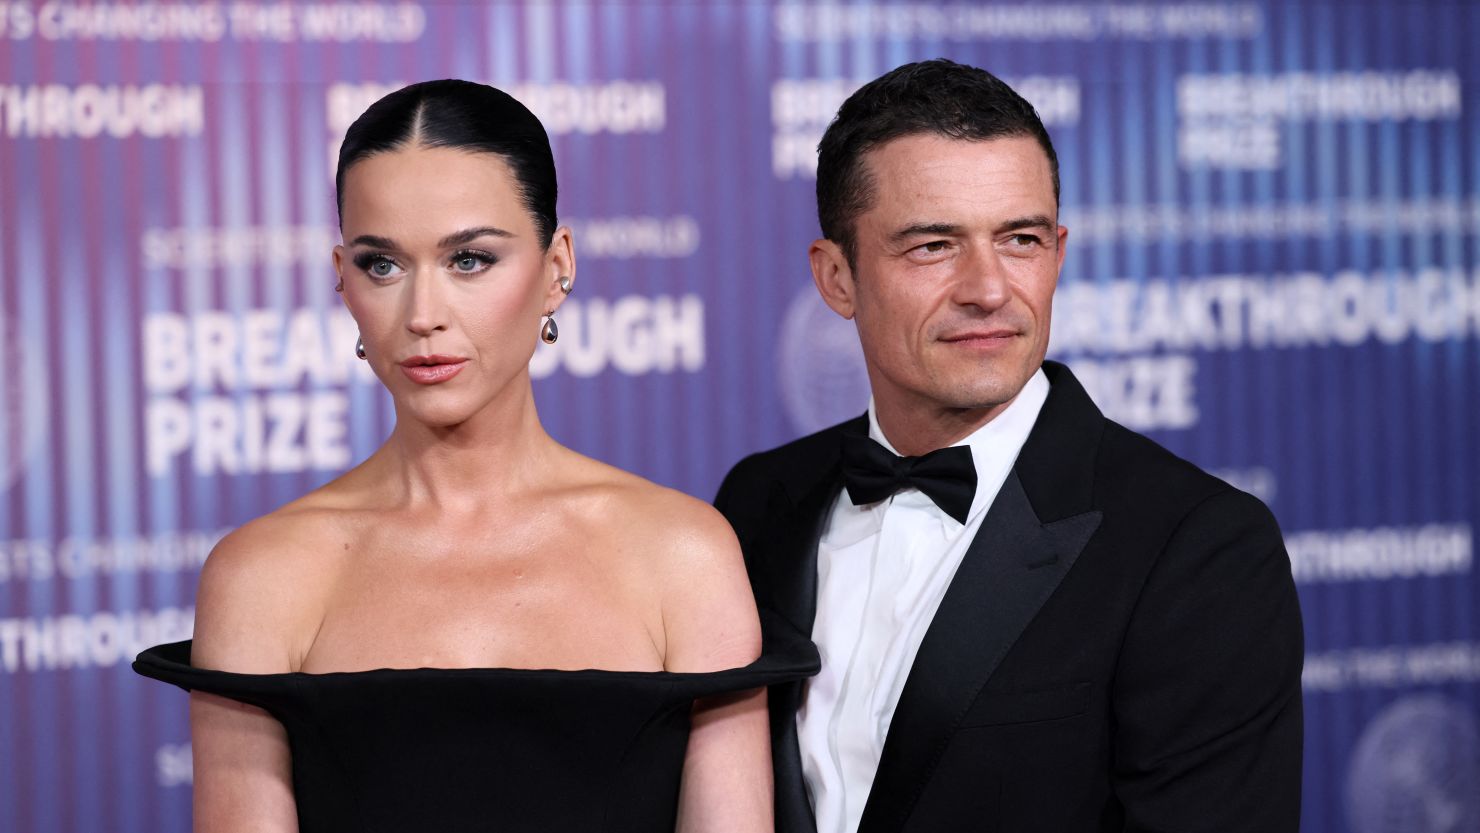 Orlando Bloom talks about his life with Katy Perry